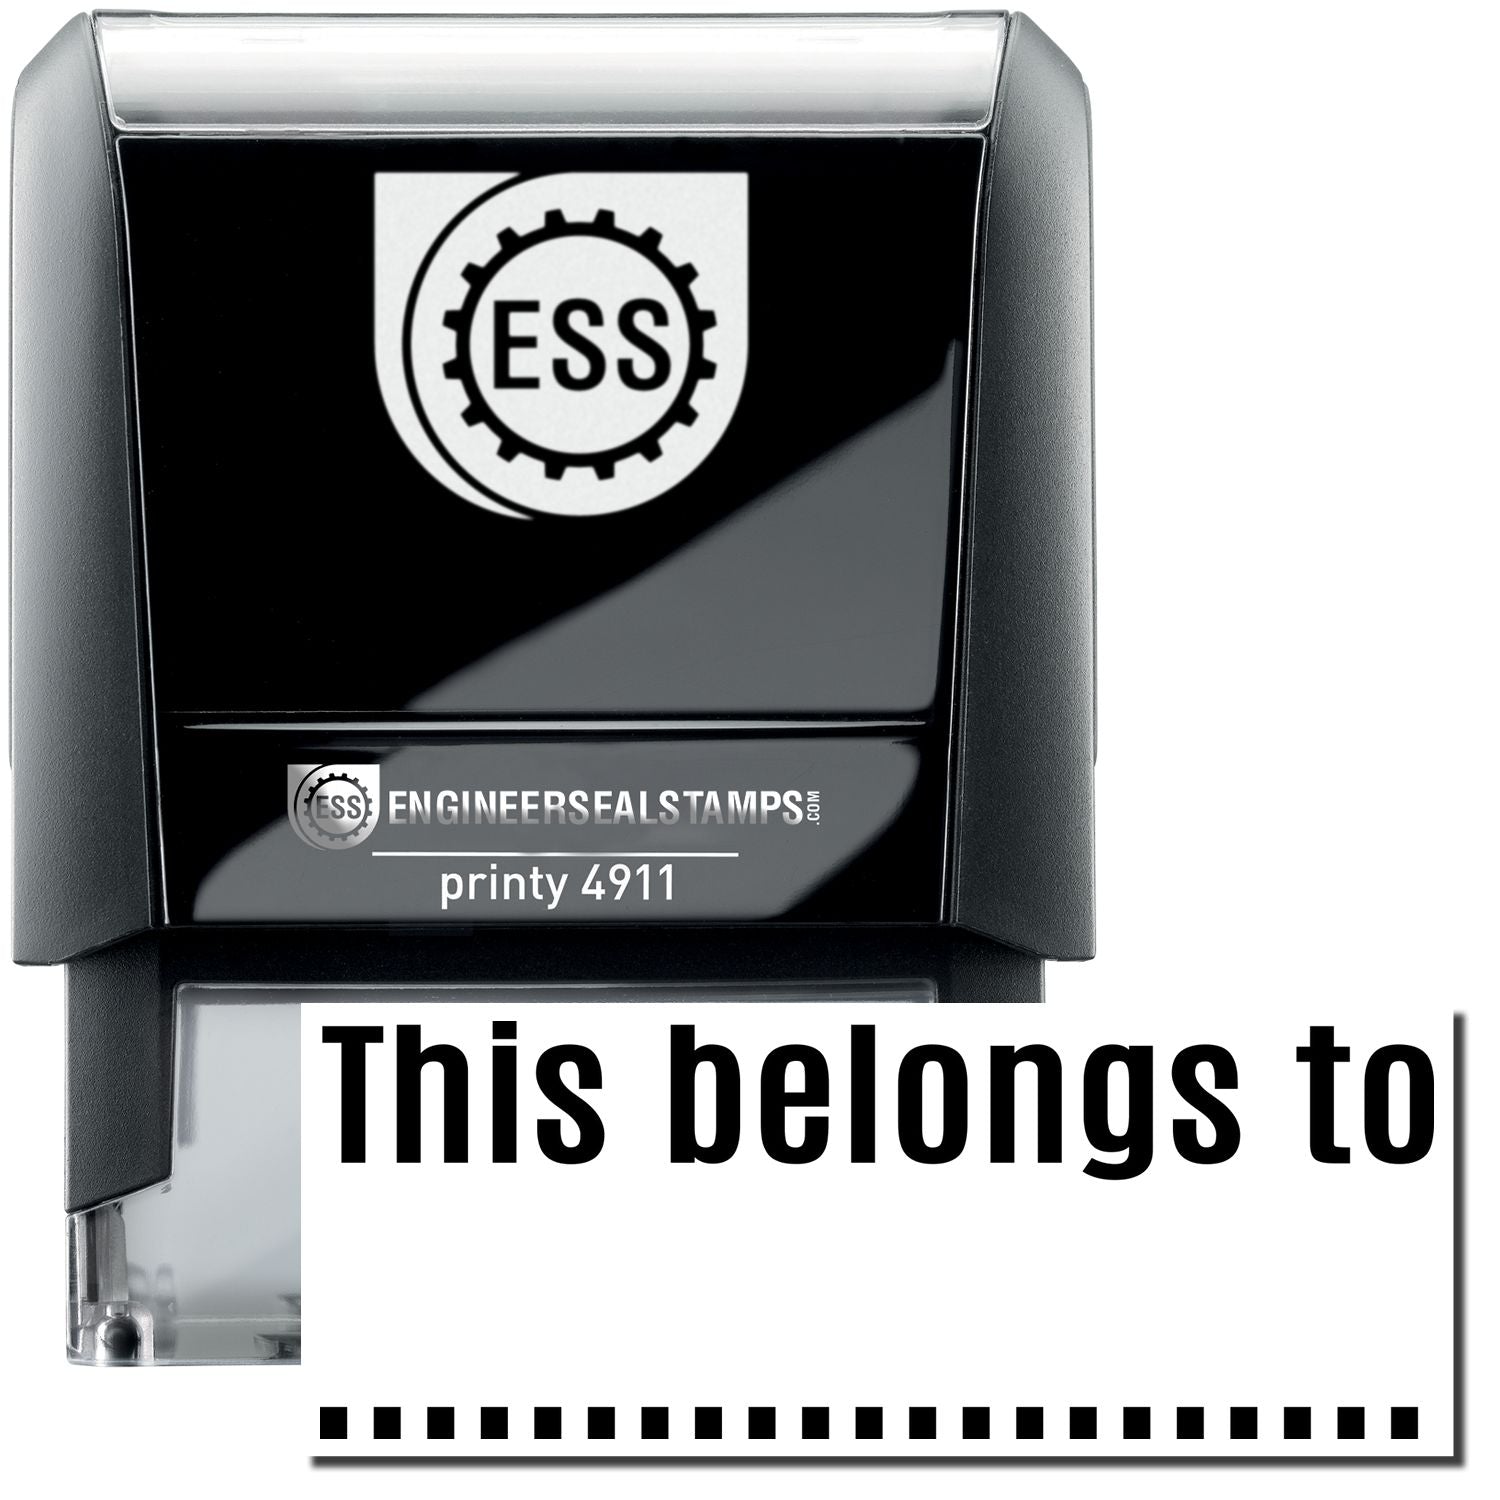 A self-inking stamp with a stamped image showing how the text "This belongs to" with a dotted line underneath is displayed after stamping.